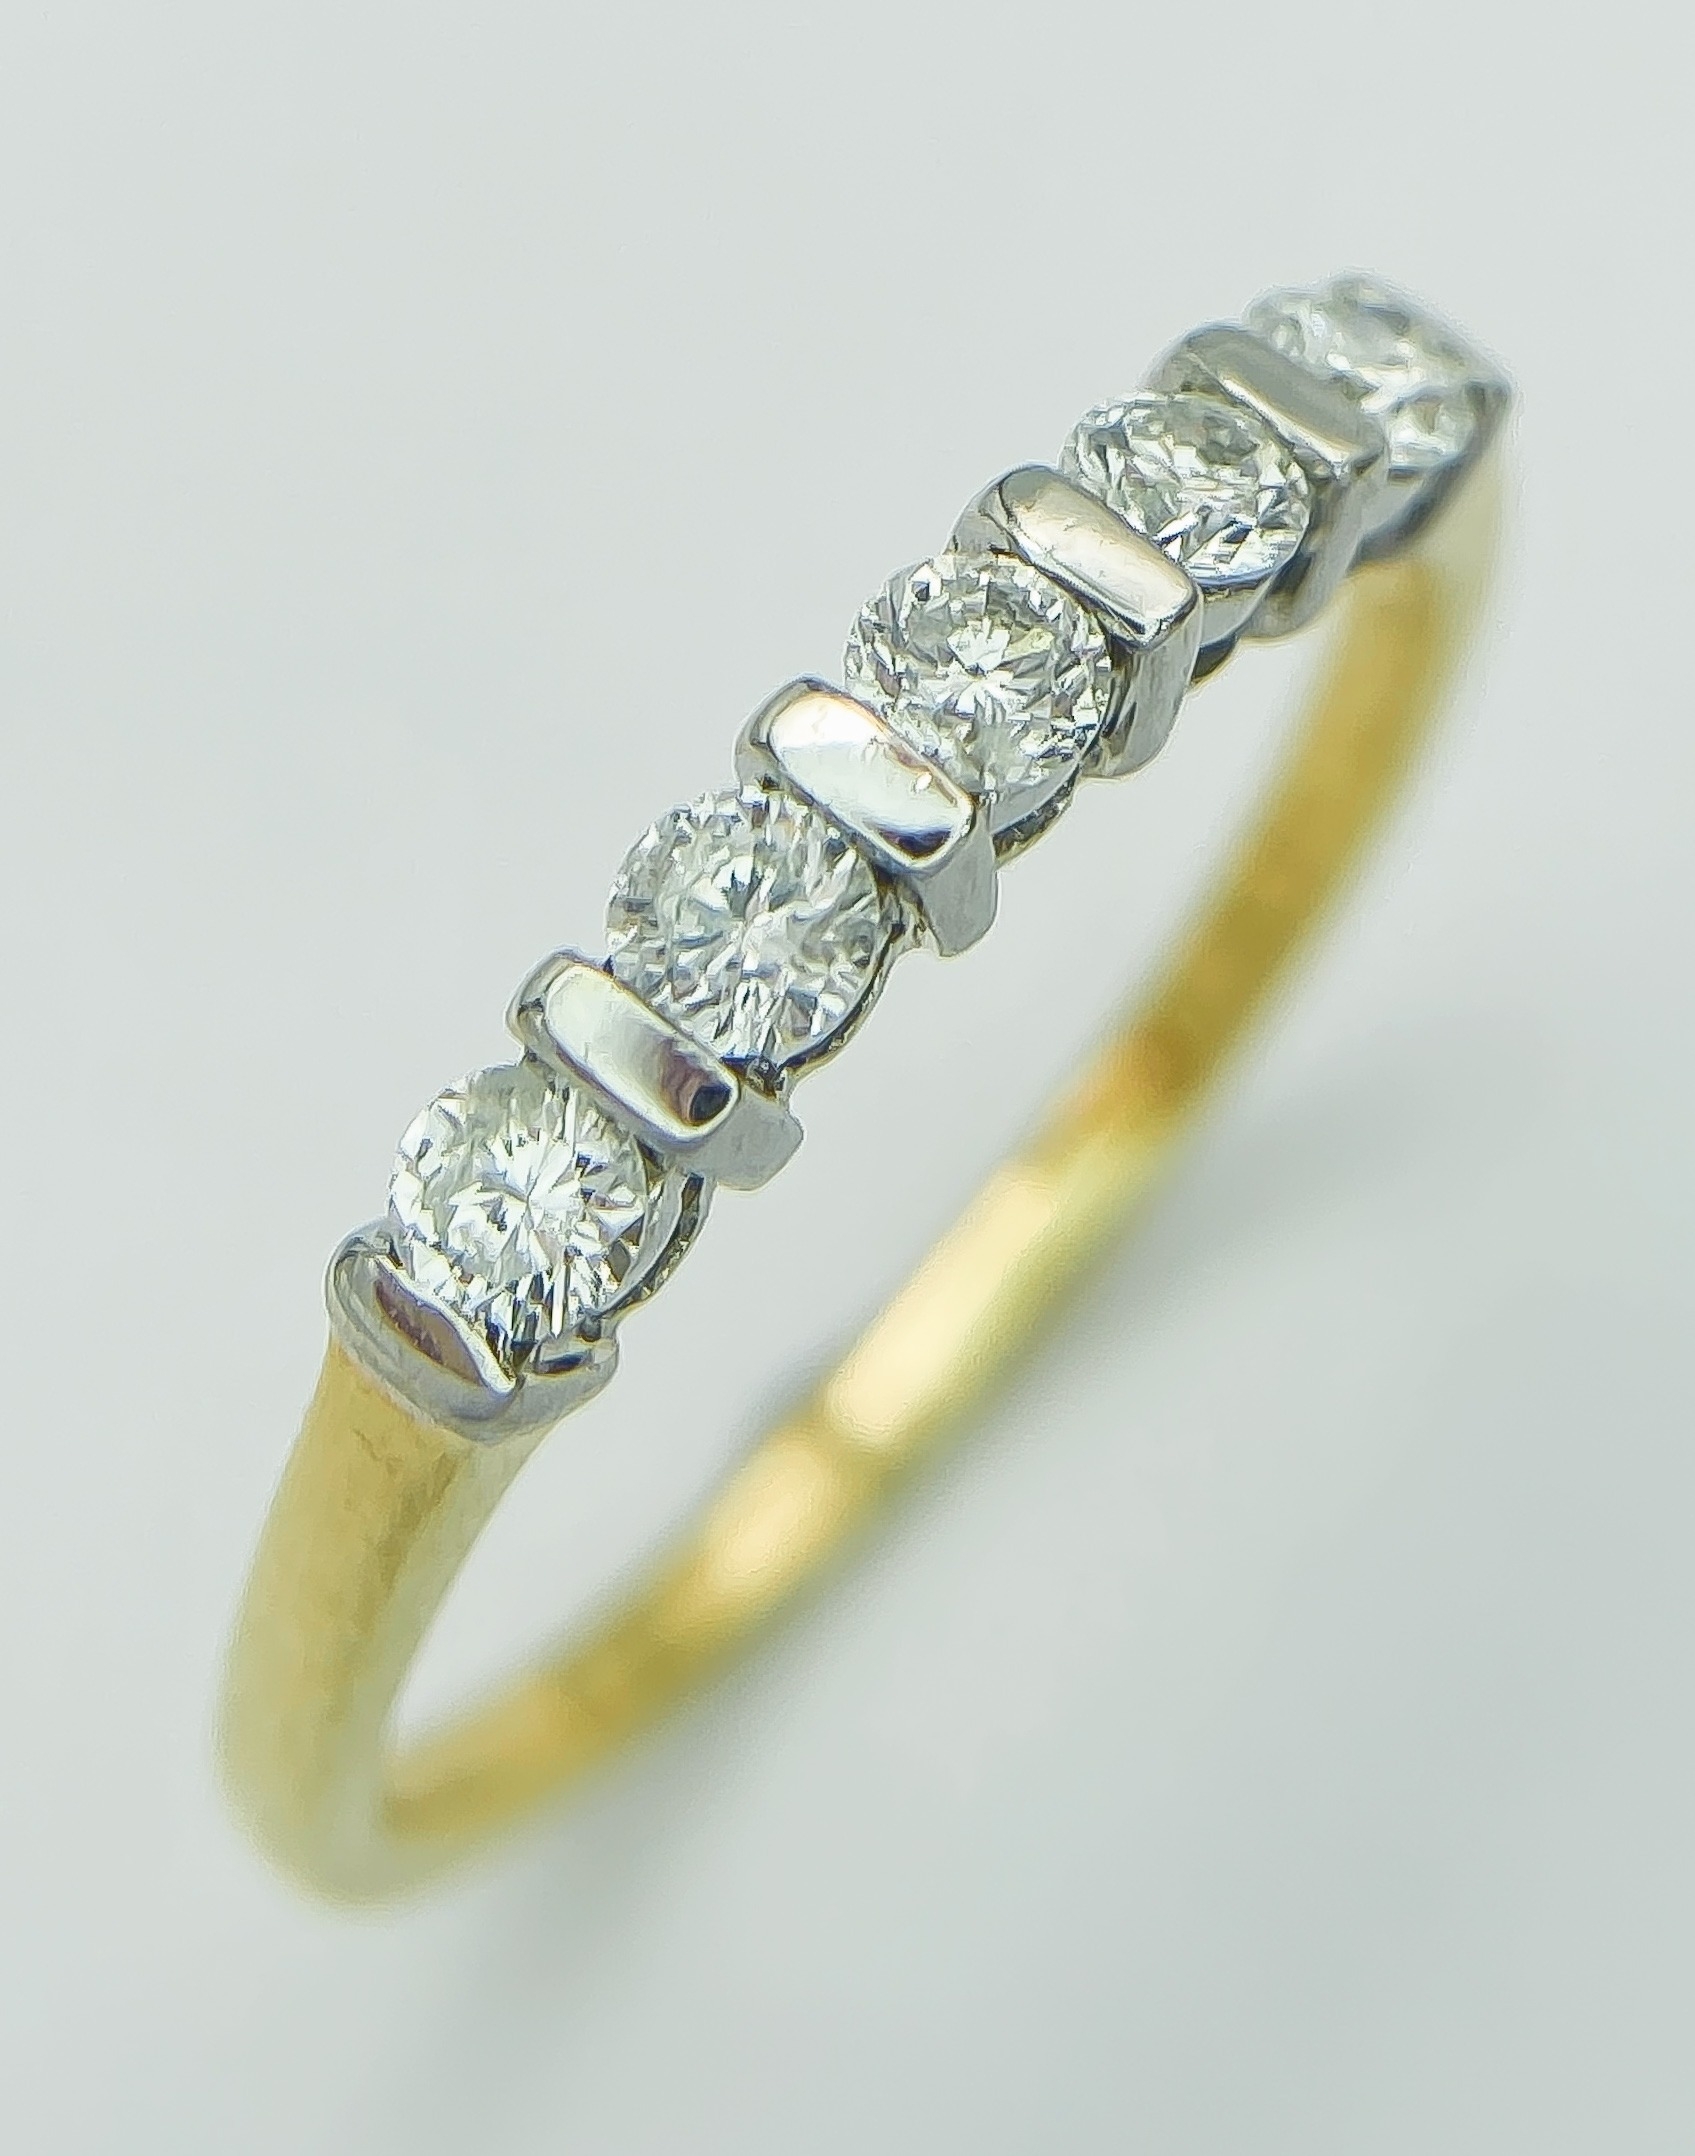 AN 18K YELLOW GOLD AND DIAMOND 5 STONE RING. 0.25CT. 1.8G. SIZE J.